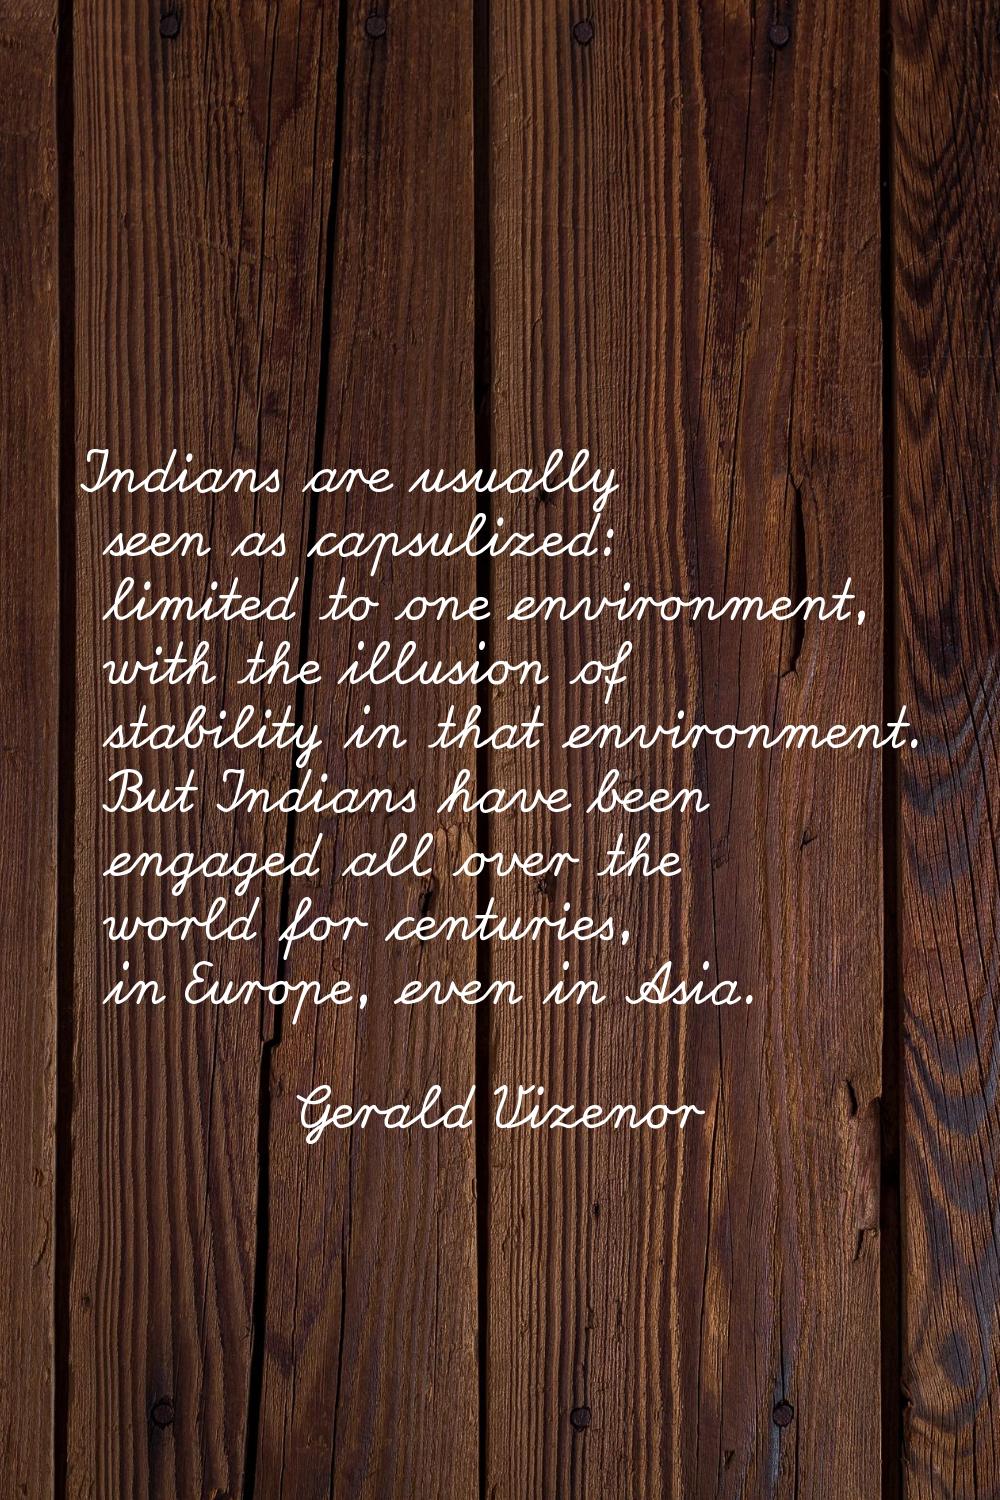 Indians are usually seen as capsulized: limited to one environment, with the illusion of stability 